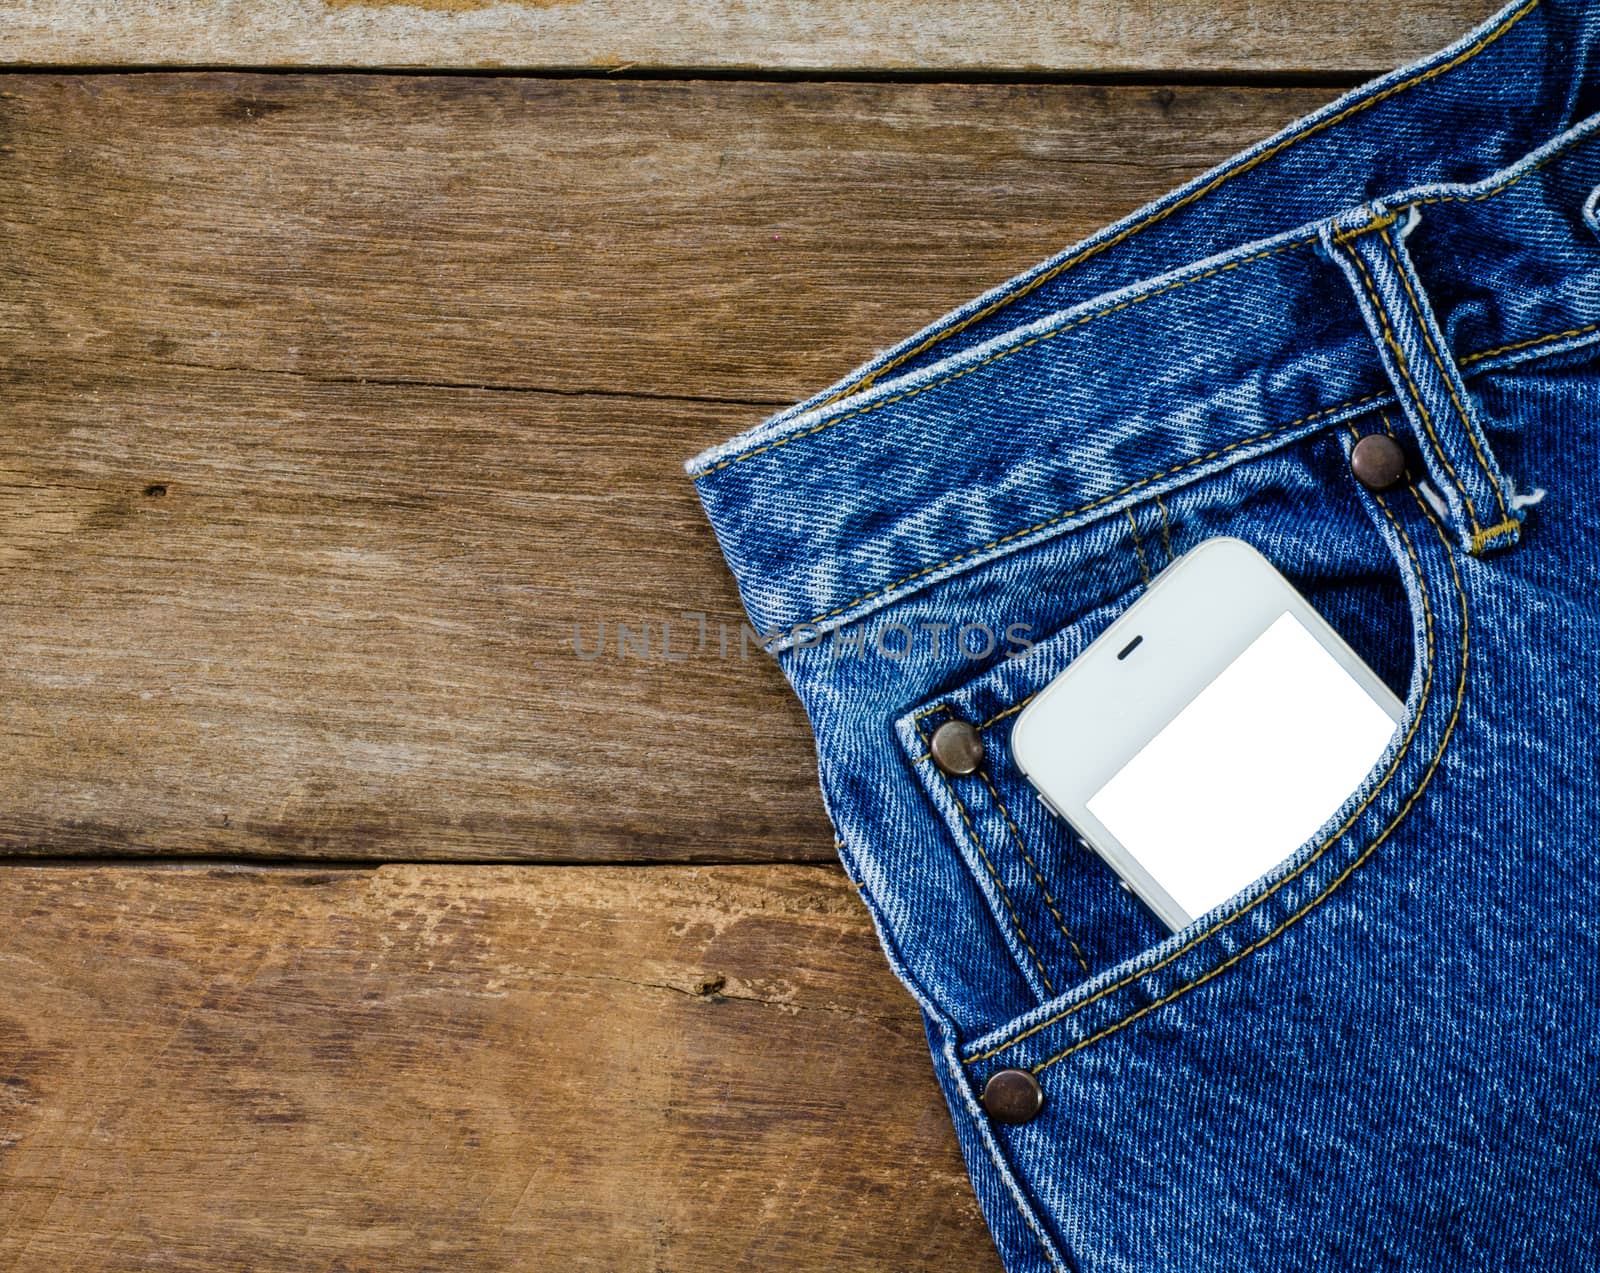 smart phone in pocket jeans on wooden background